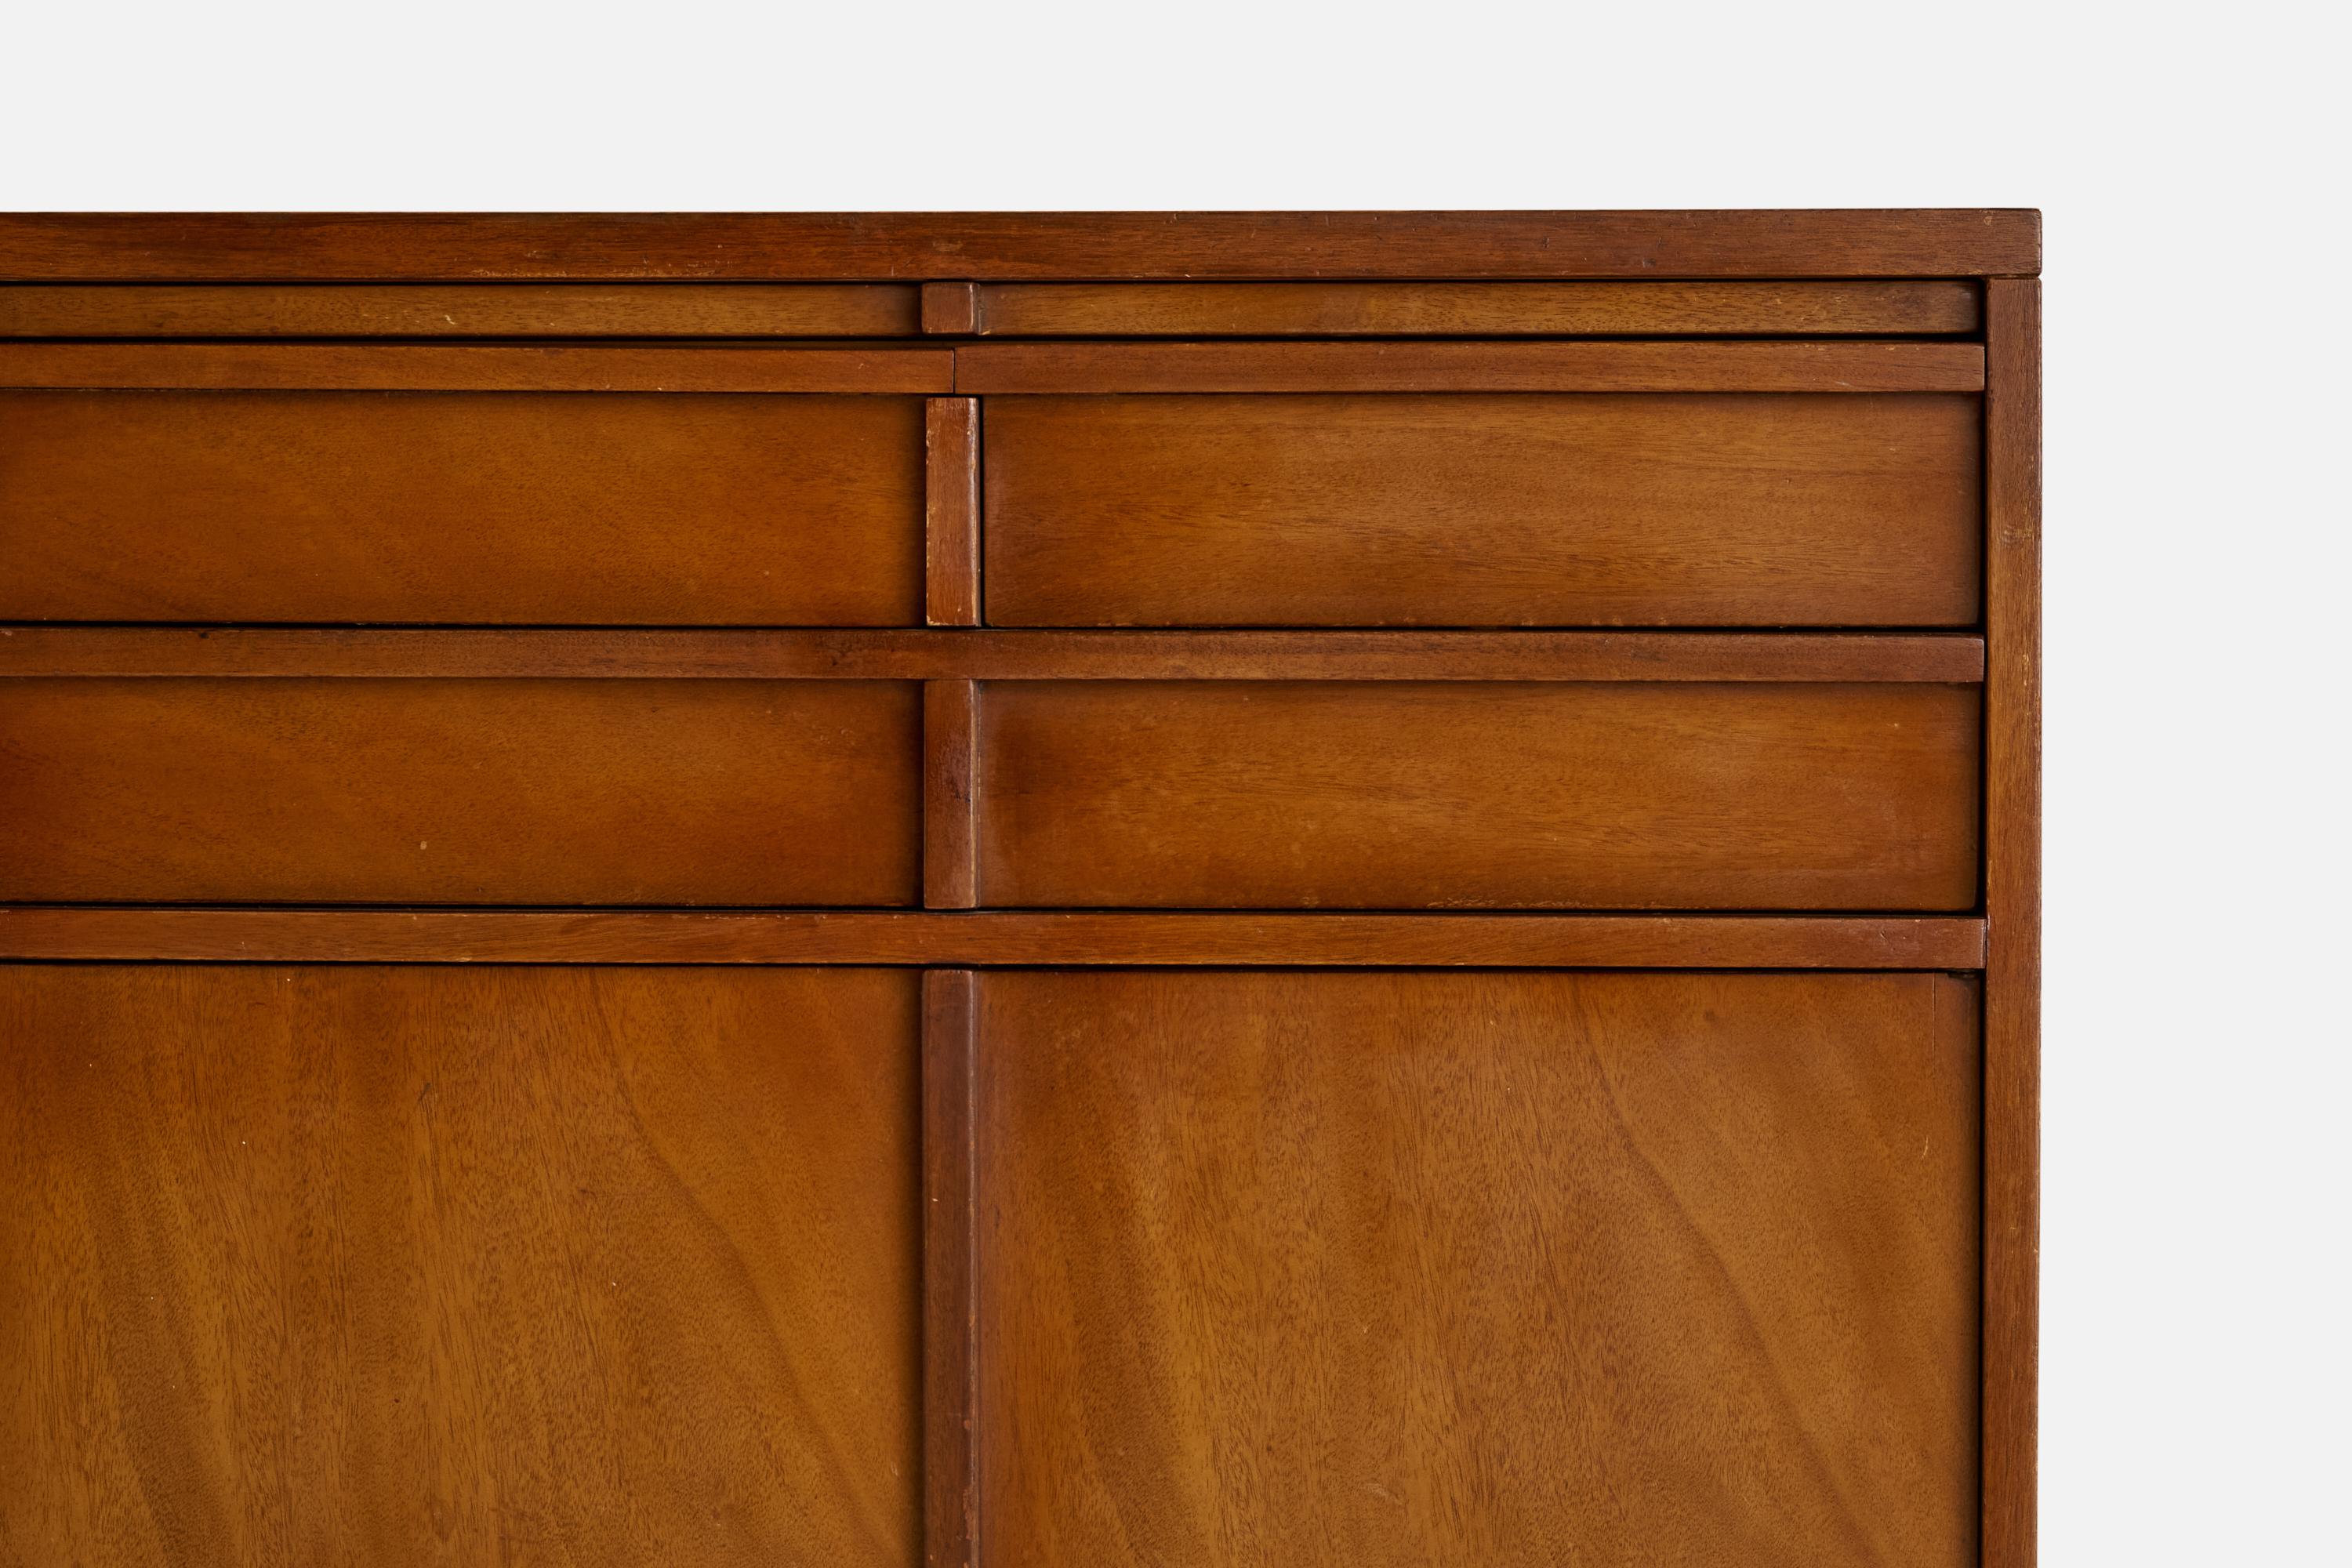 A dark-stained maple cabinet produced by Sligh Furniture, USA, 1950s.